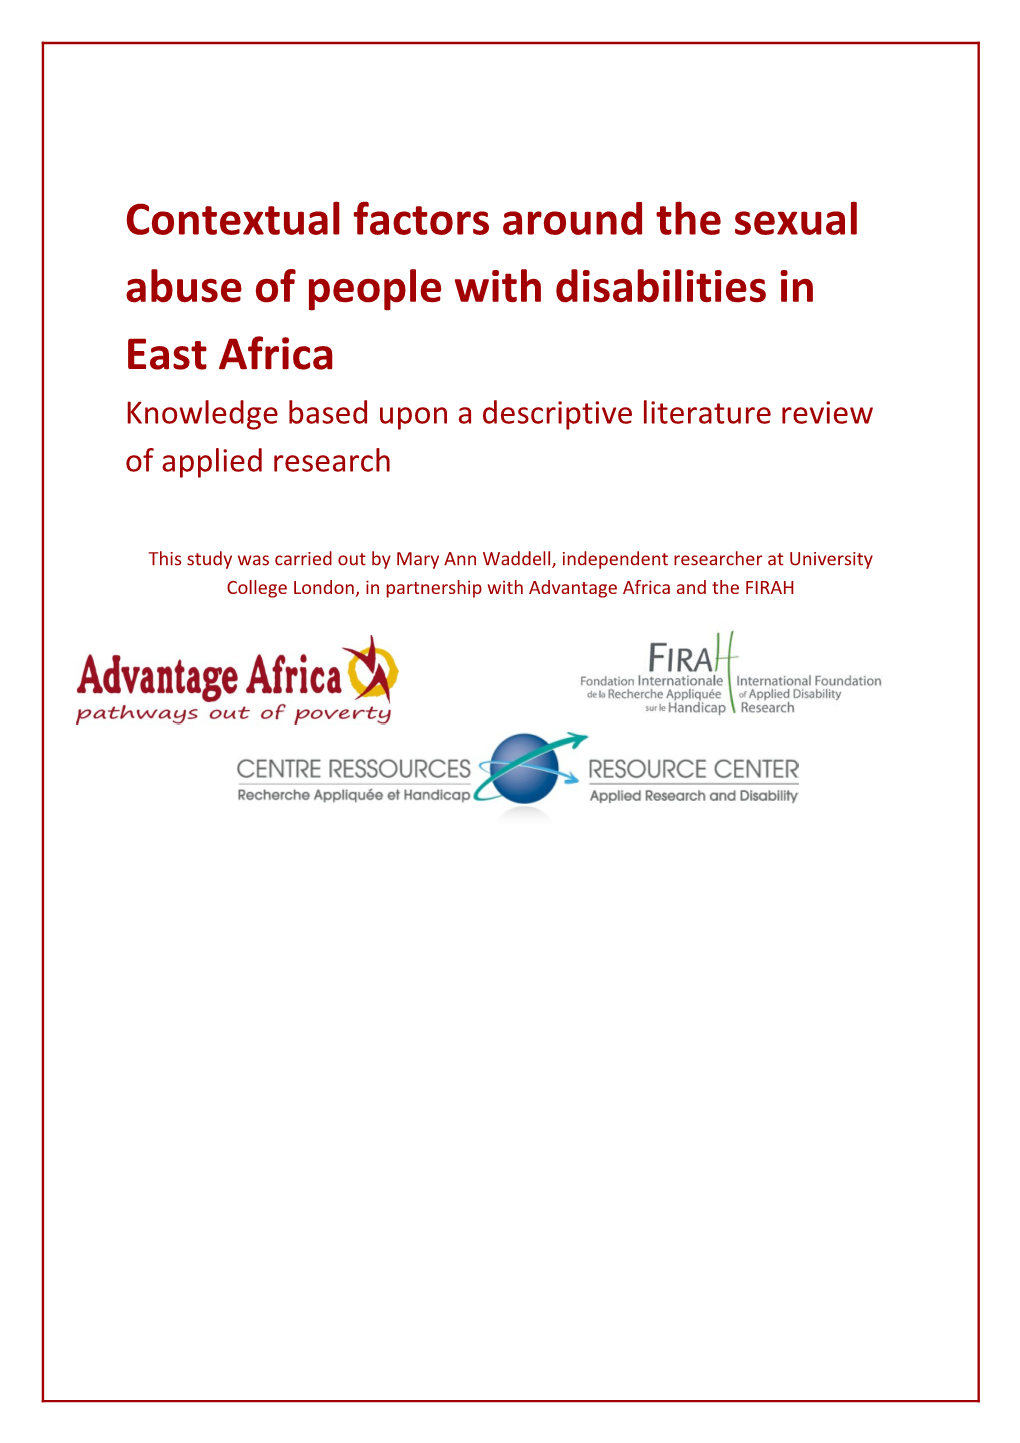 Contextual Factors Around the Sexual Abuse of People with Disabilities in East Africa